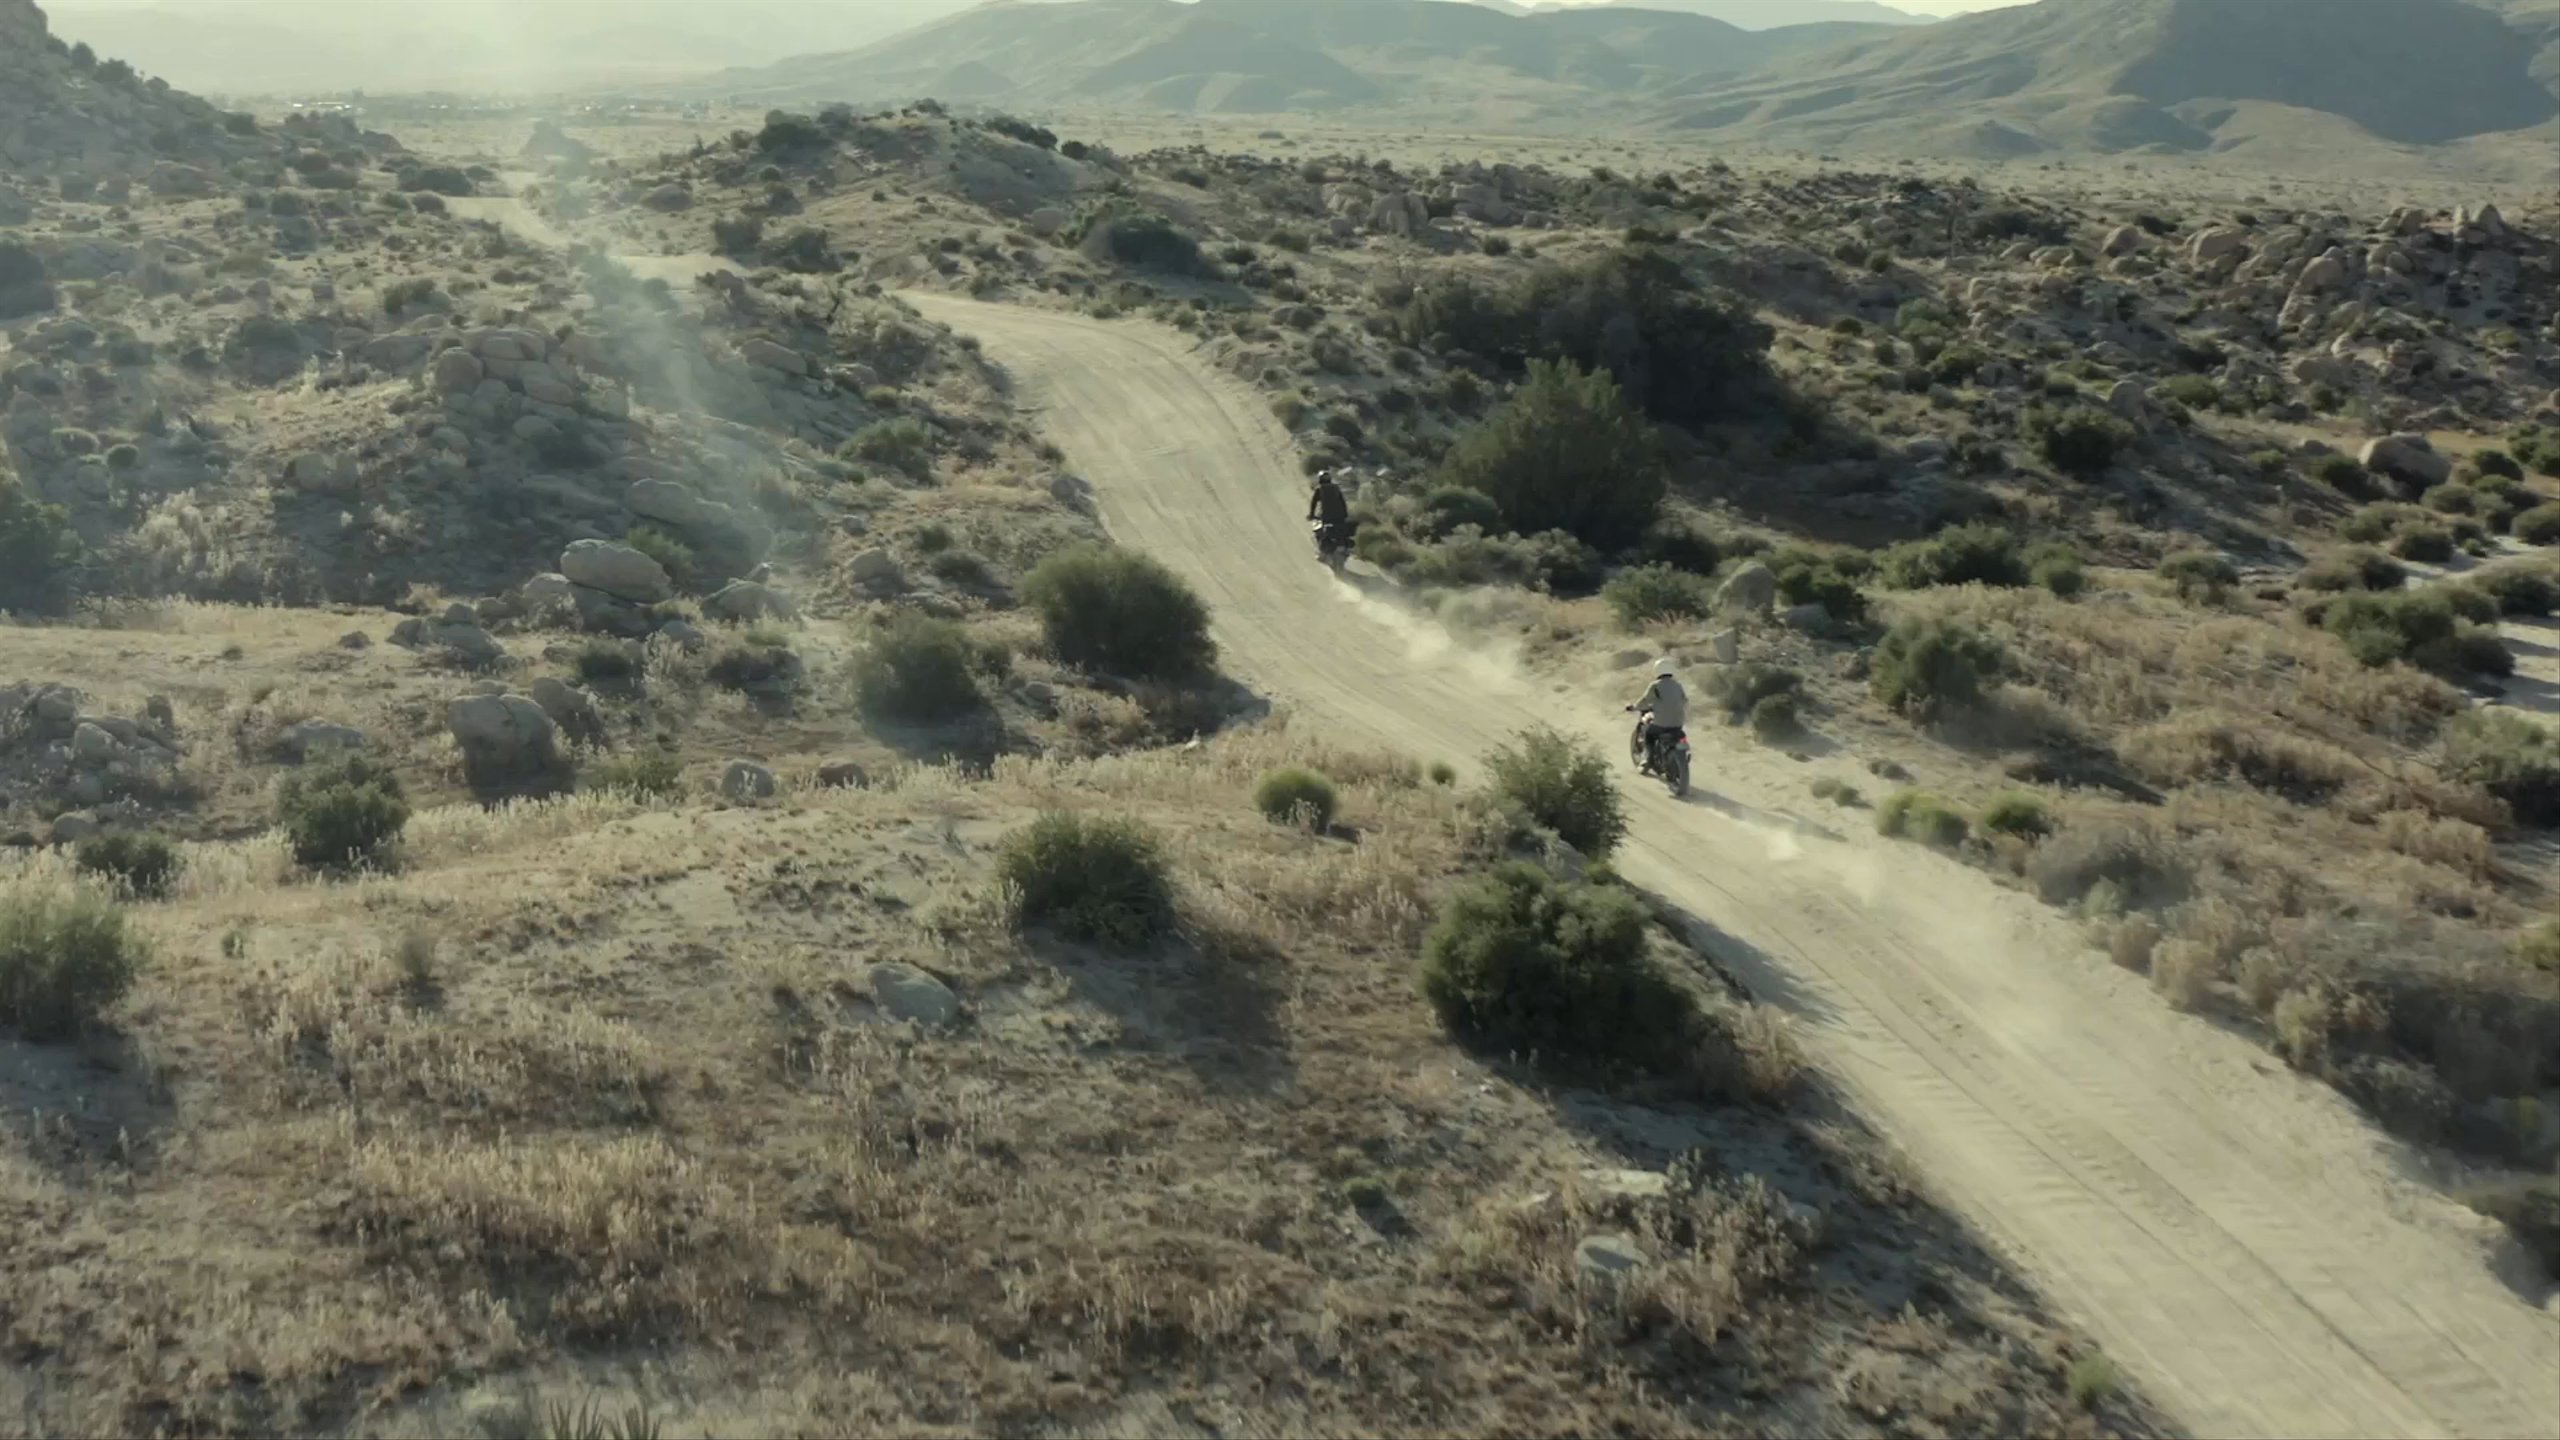 Video of motorcyclists riding down dirt path in Joshua Tree, California